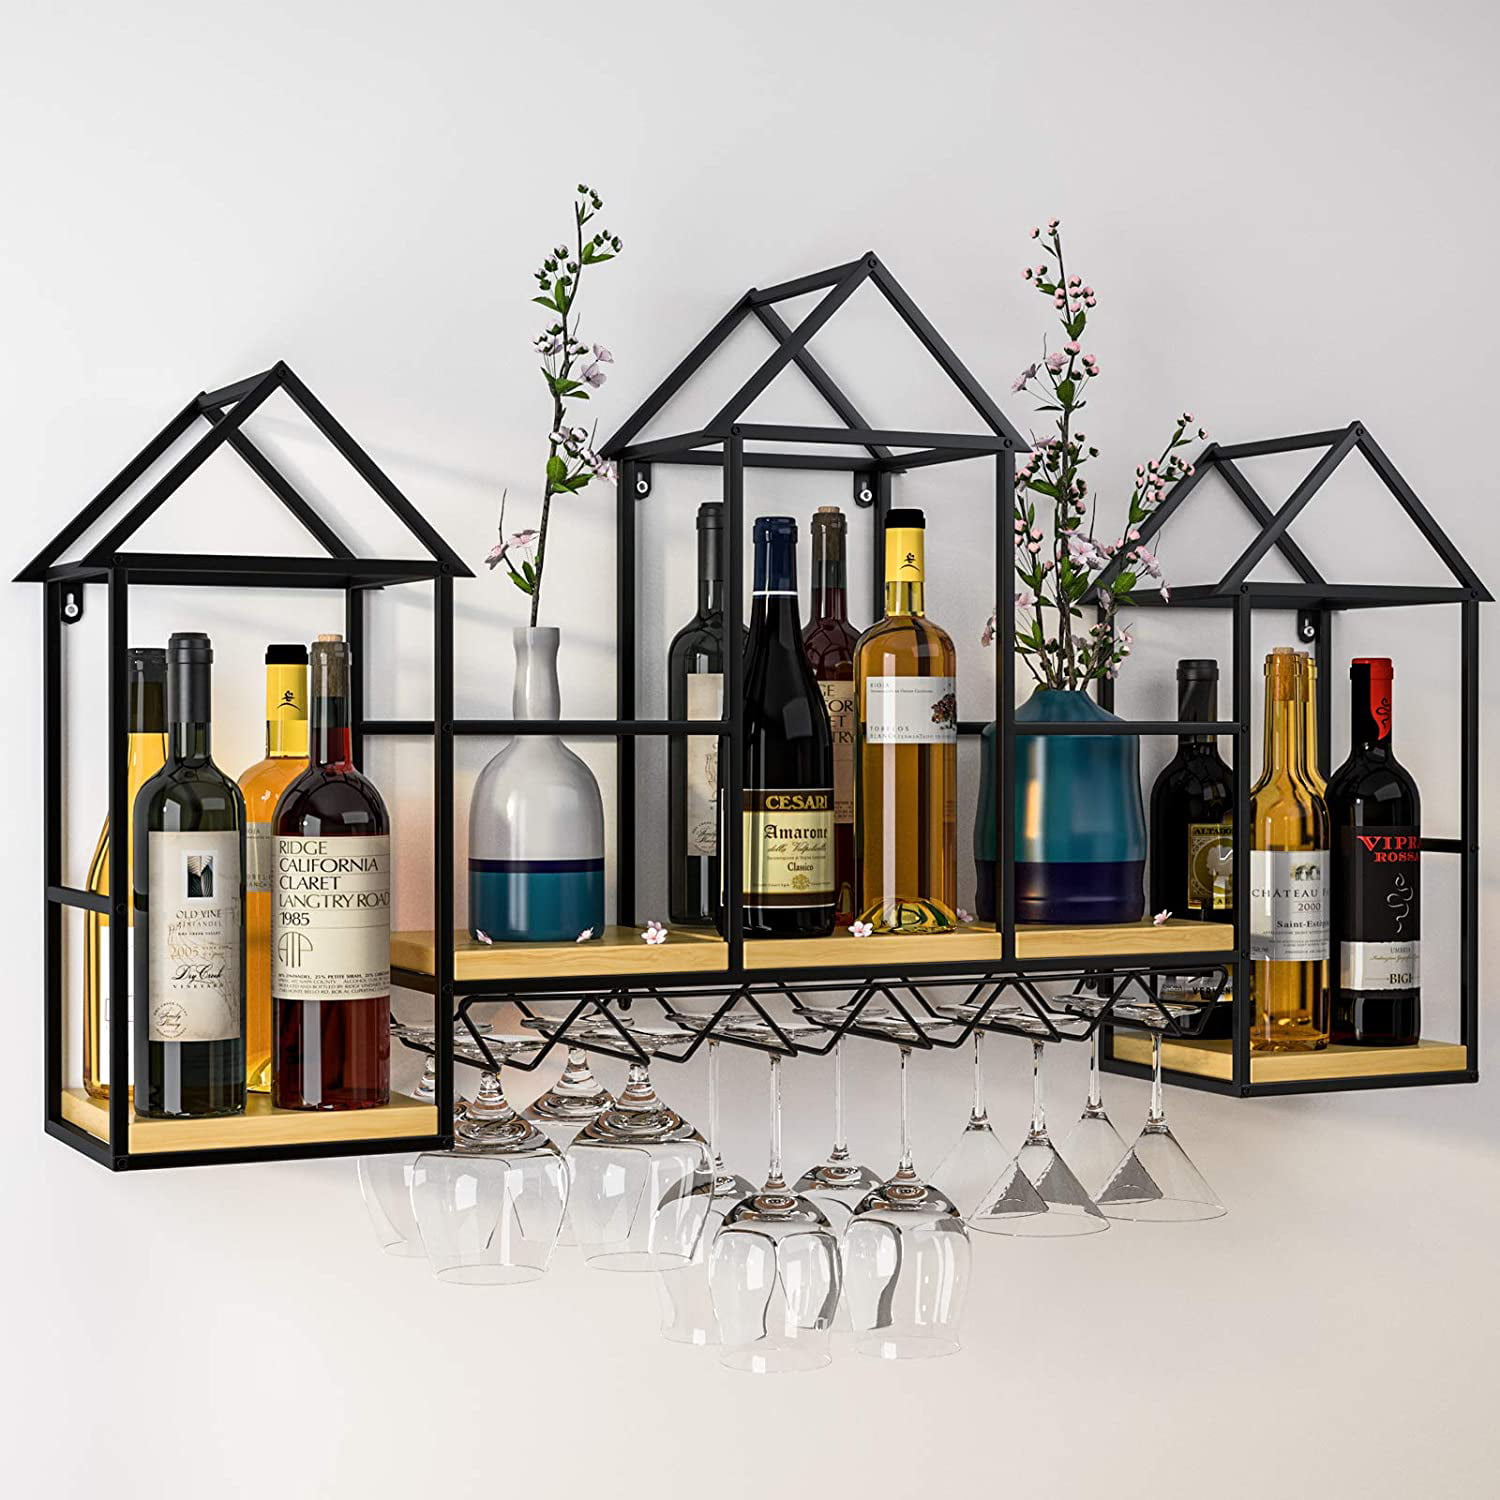 Wall Decoration Black Display Rack Included Mounting Screws and Anchors A LIUHE 3 Pack Metal Wall-Mounted Wine Rack Wine Bottle Storage Rack 